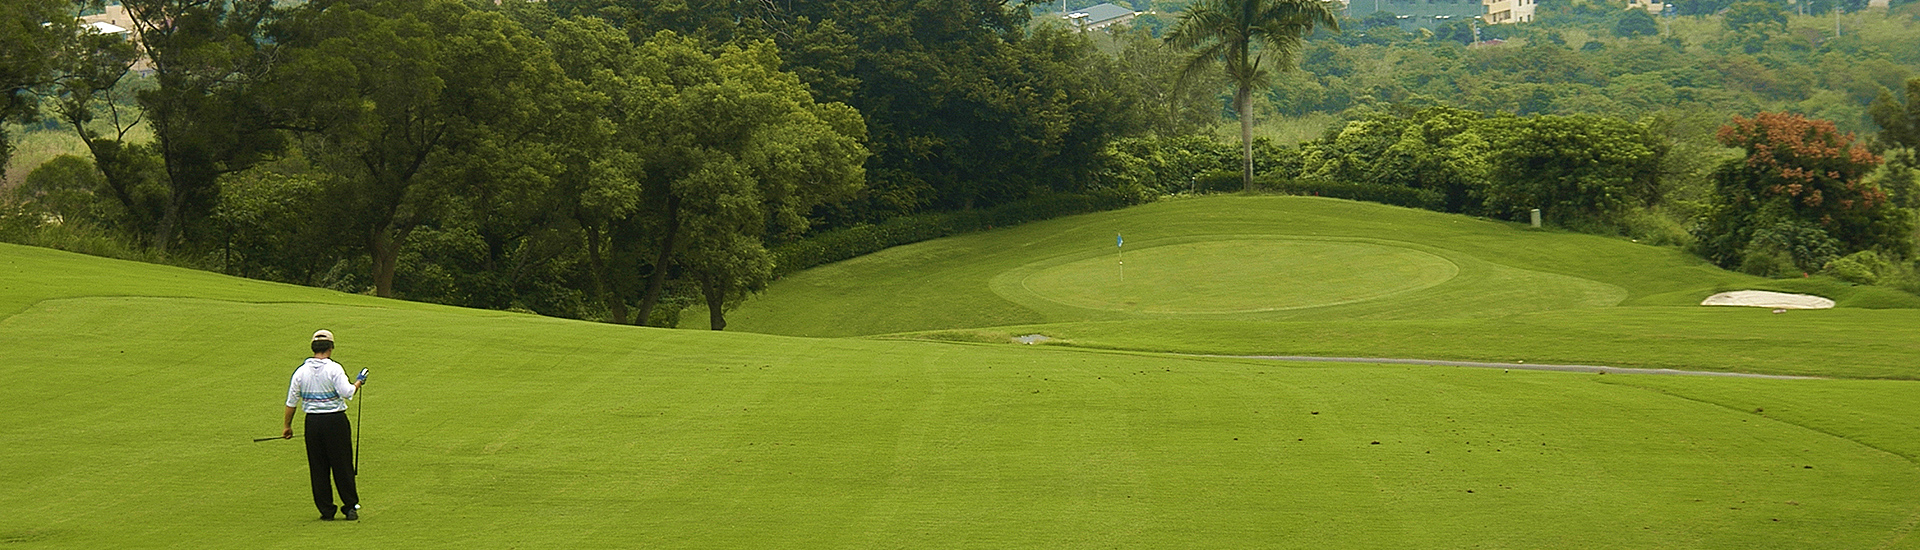 Taifong Golf Course